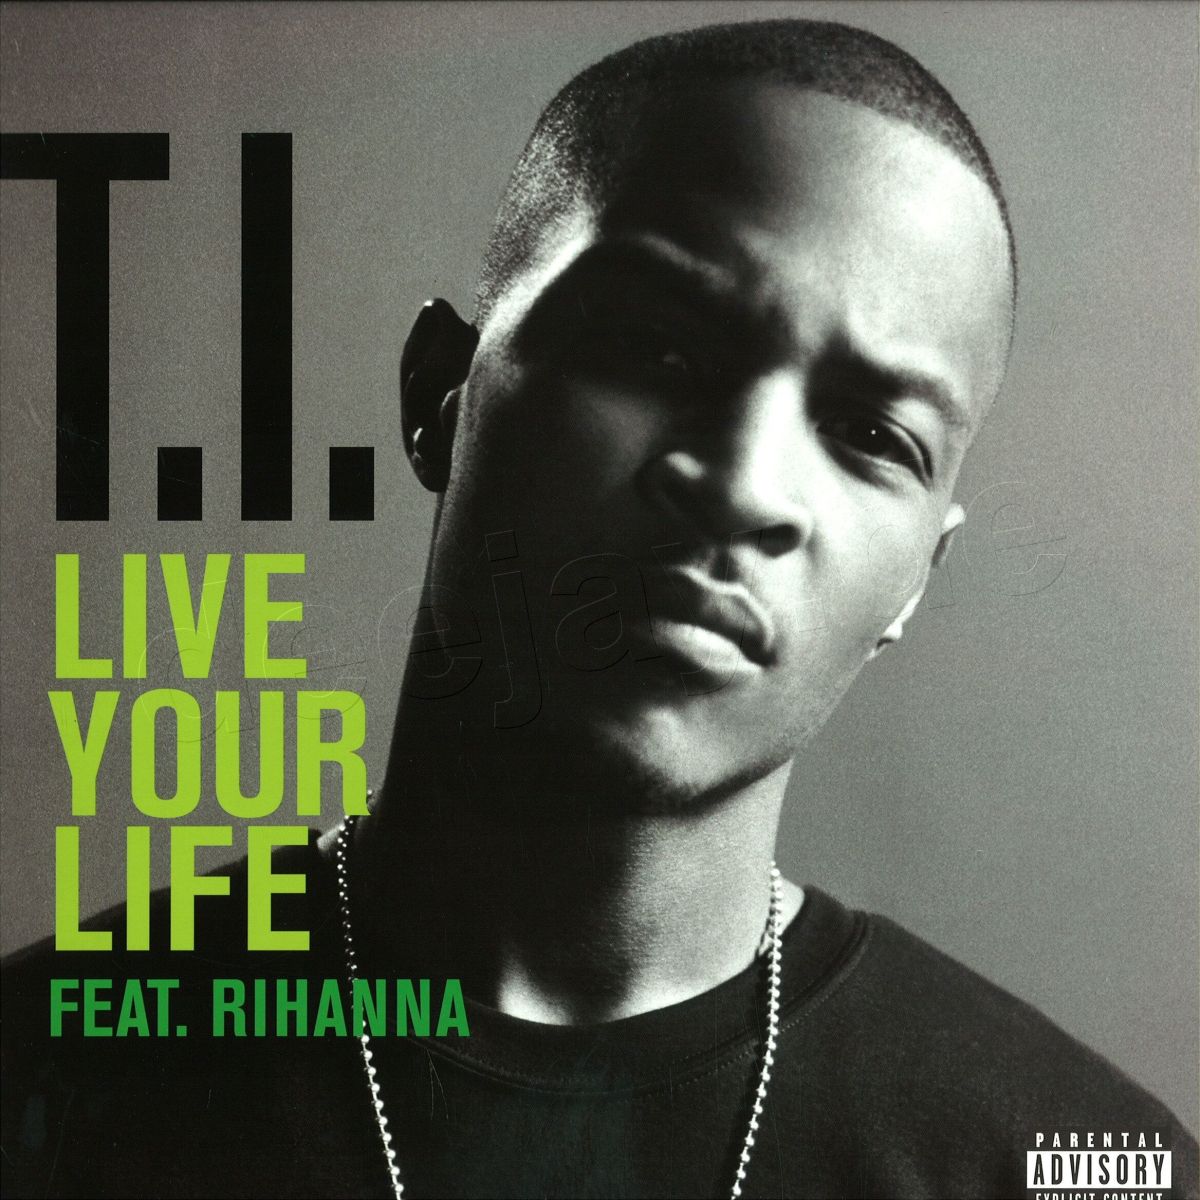 Live Your Life TI song - Wikipedia